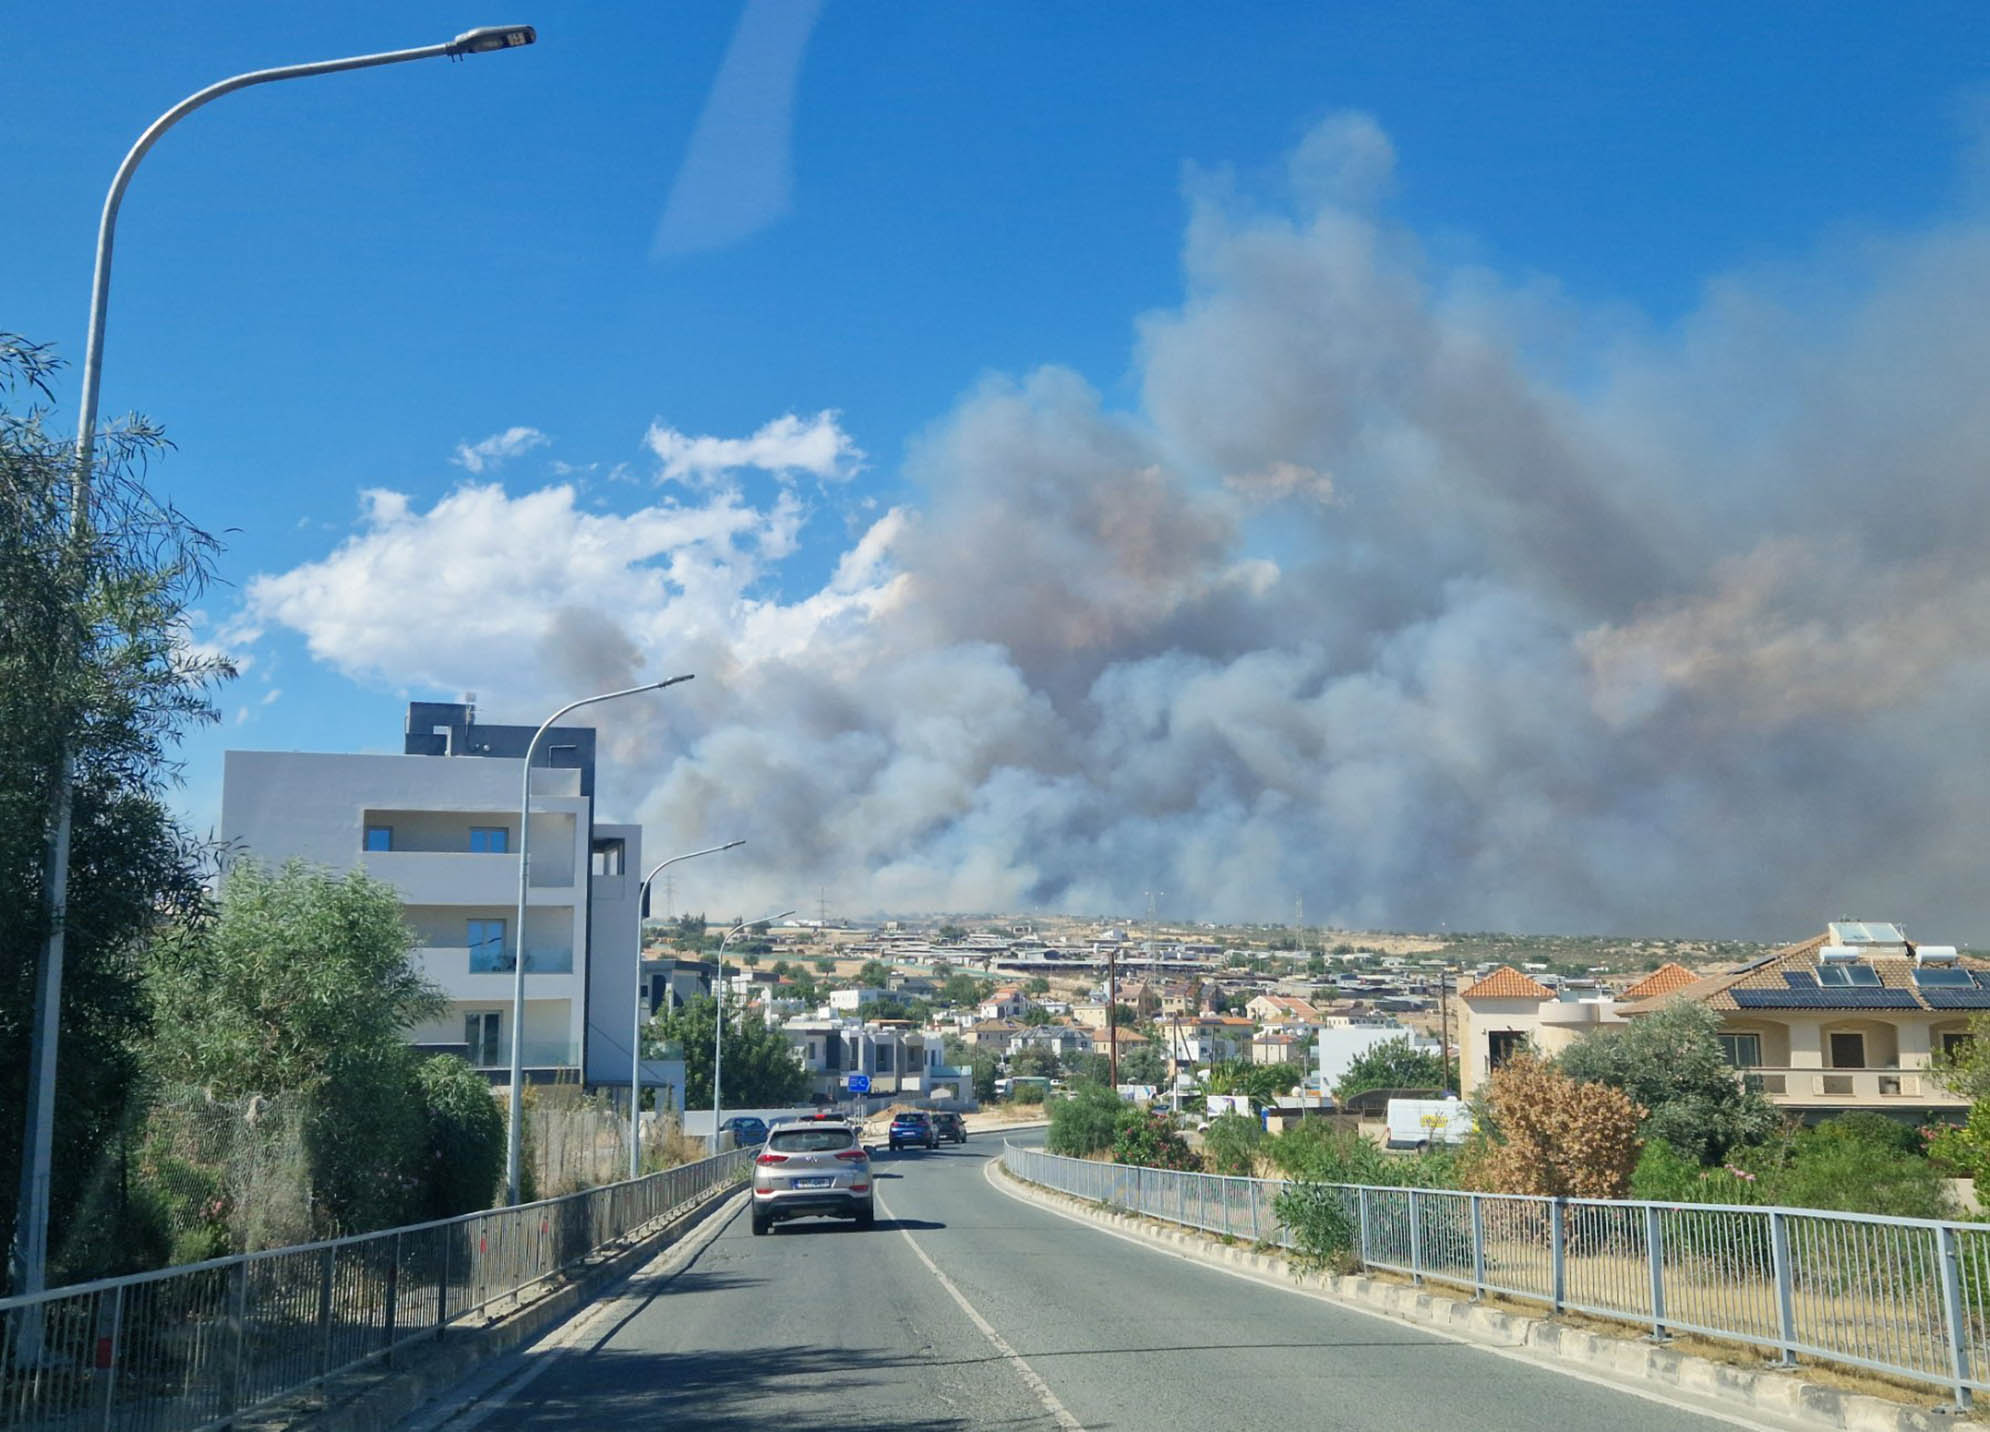 Limassol plunged into dark smoke as Ayios Sylas fire rages (Updated)